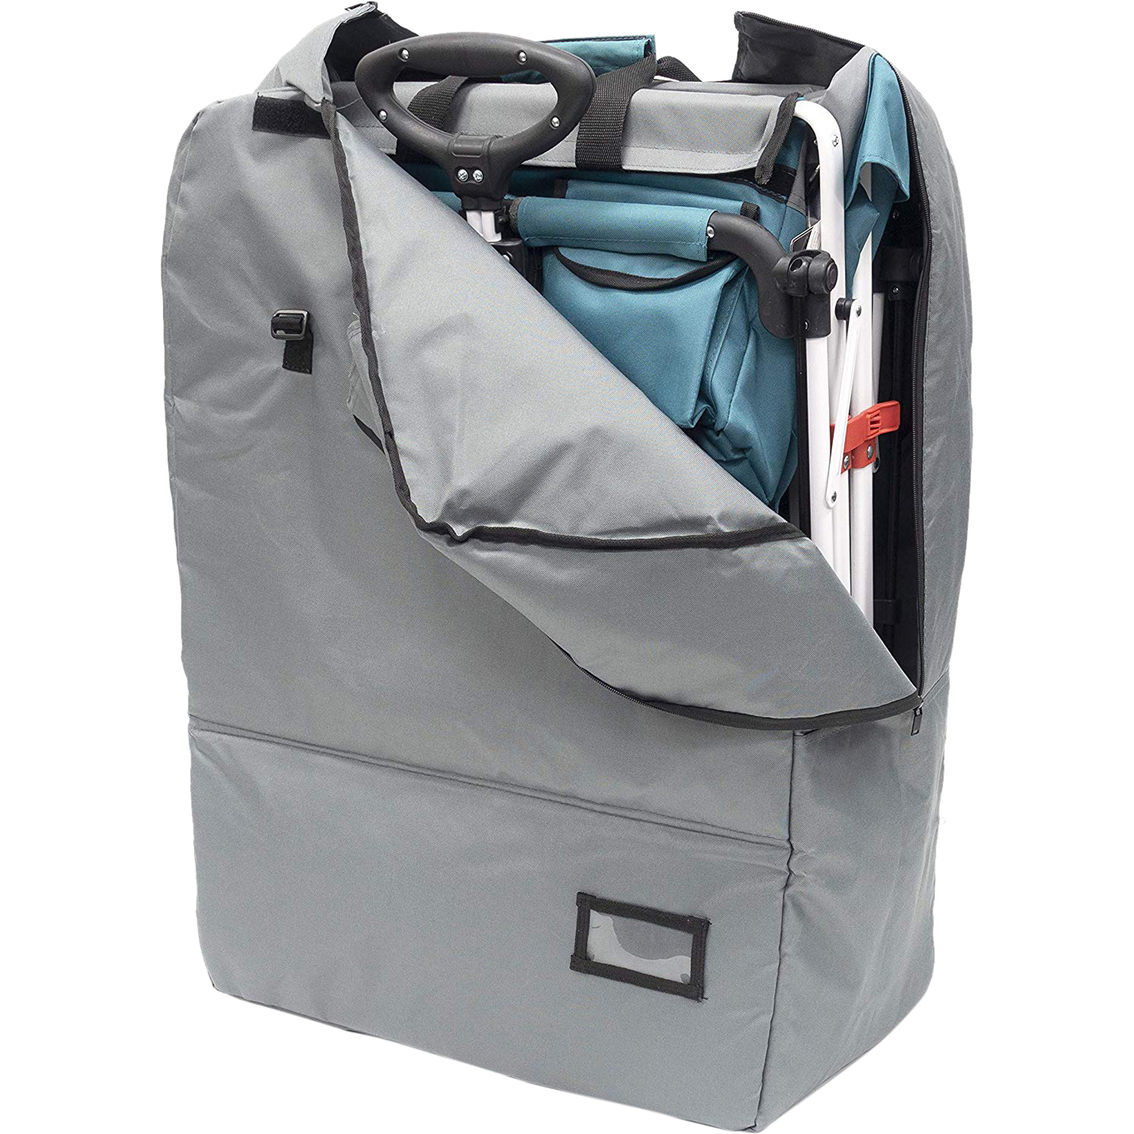 Creative Outdoor Travel Carry Bag with Wheels Accessory for Push & Pull Wagon, Gray - Image 2 of 2